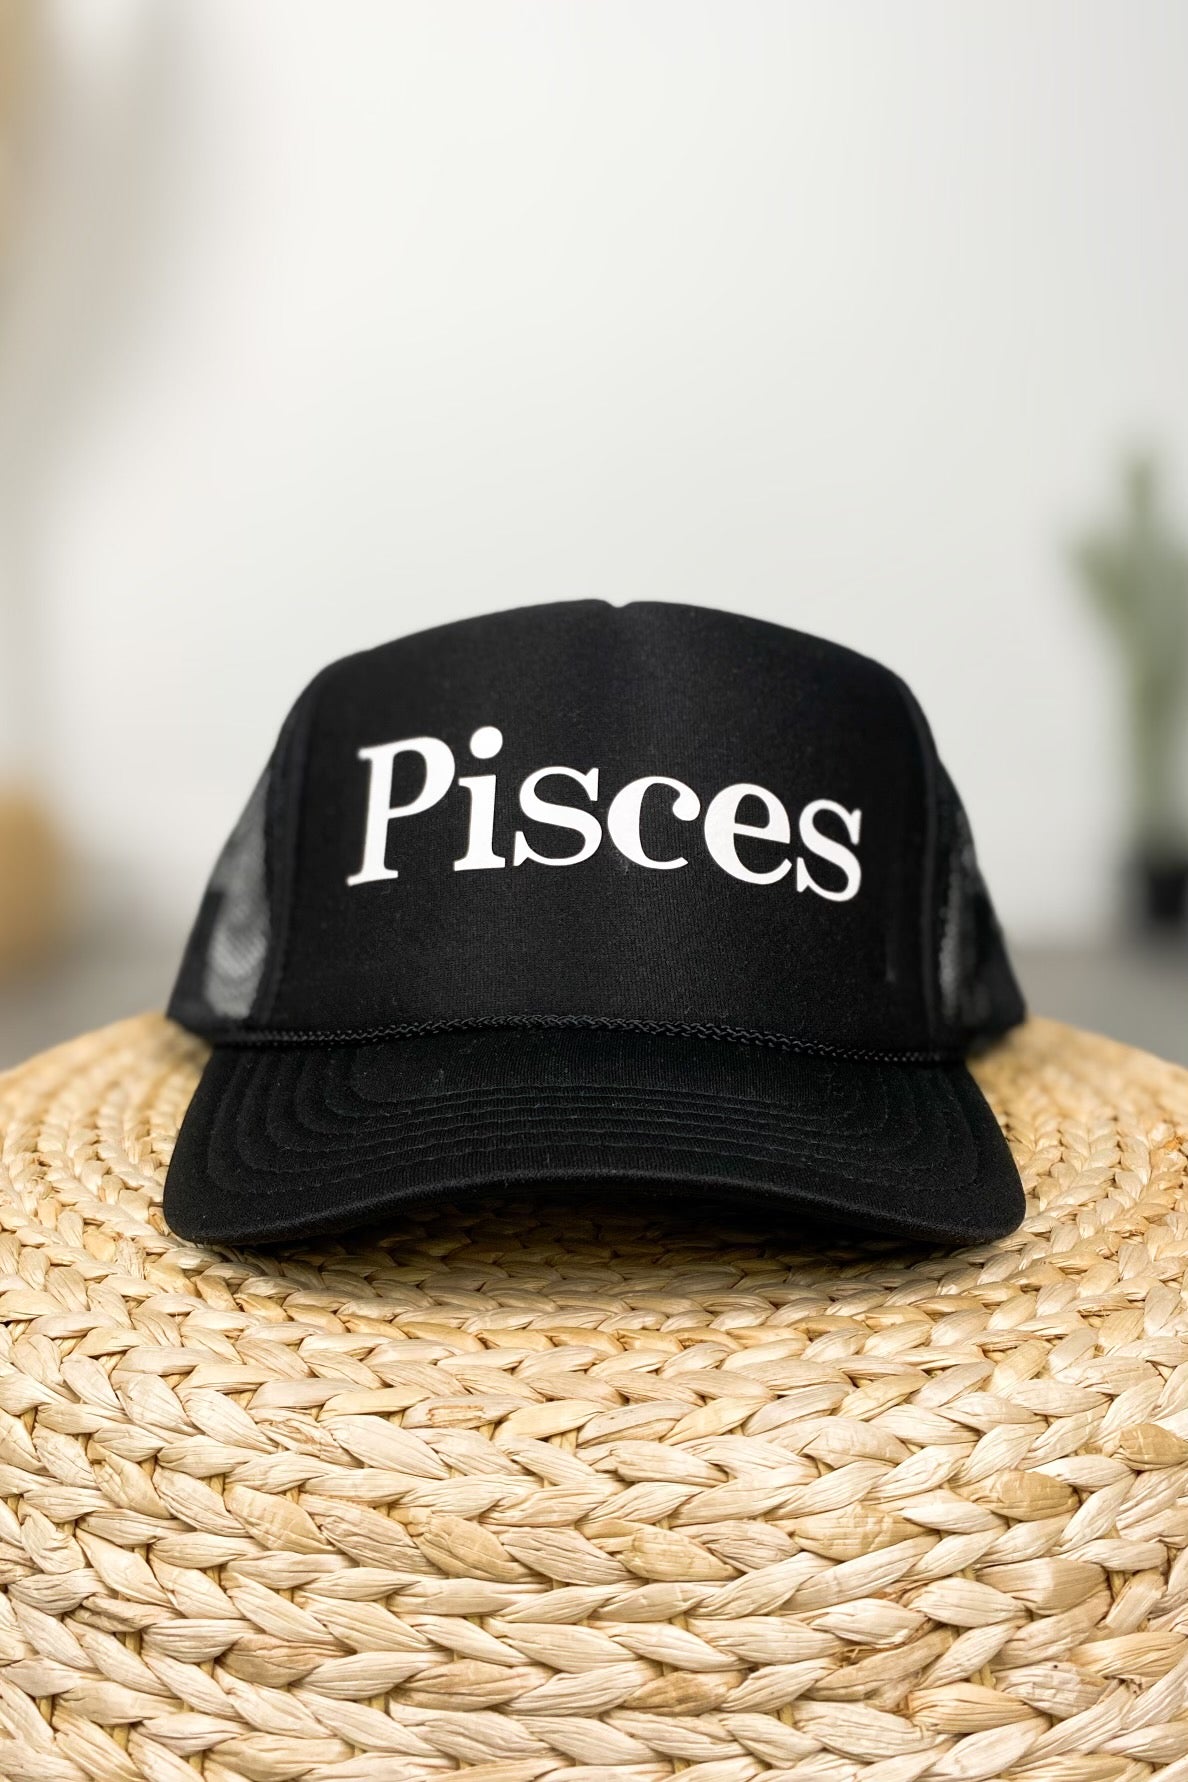 Pisces trucker hat black - Trendy Hats at Lush Fashion Lounge Boutique in Oklahoma City